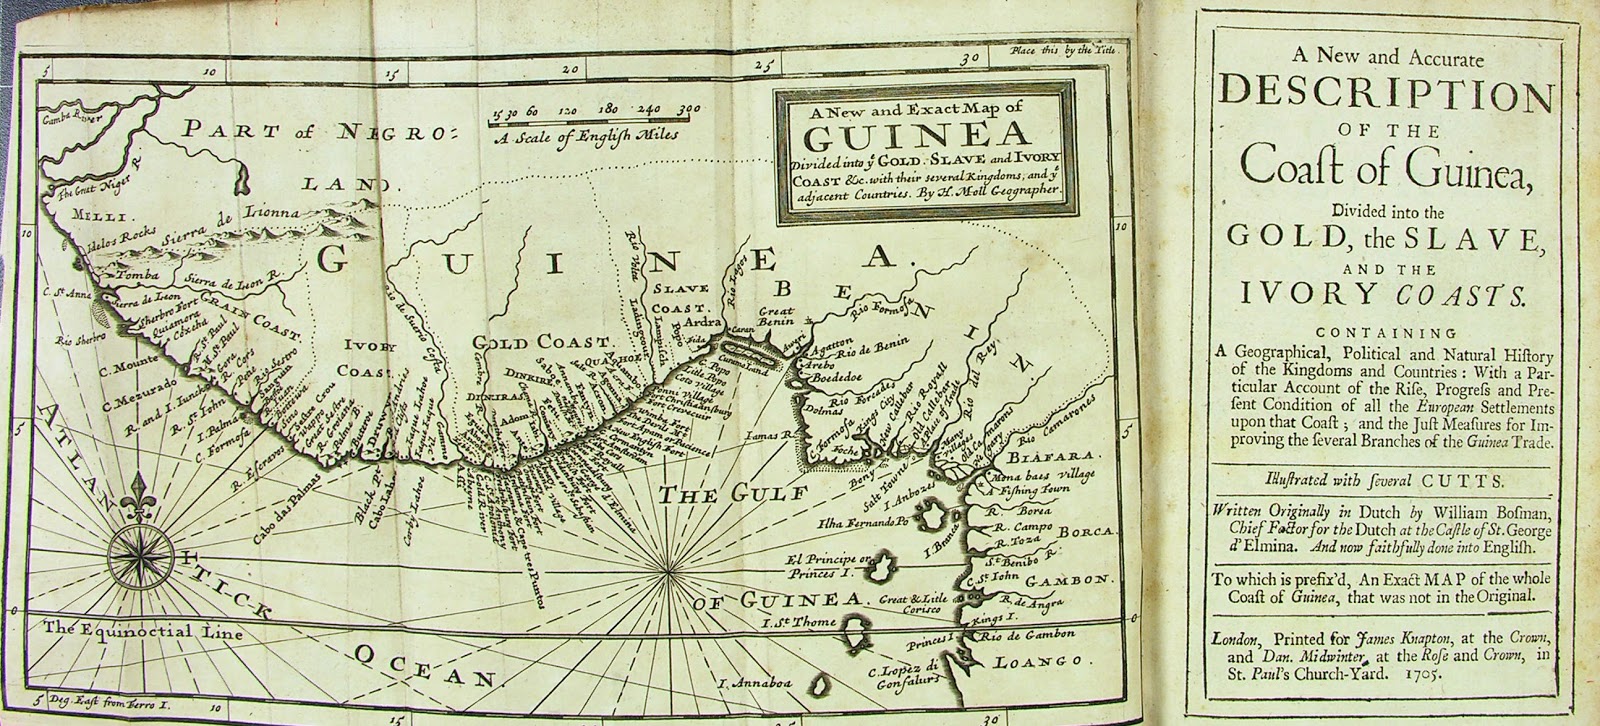 A New and Accurate Description of the Coast of Guinea